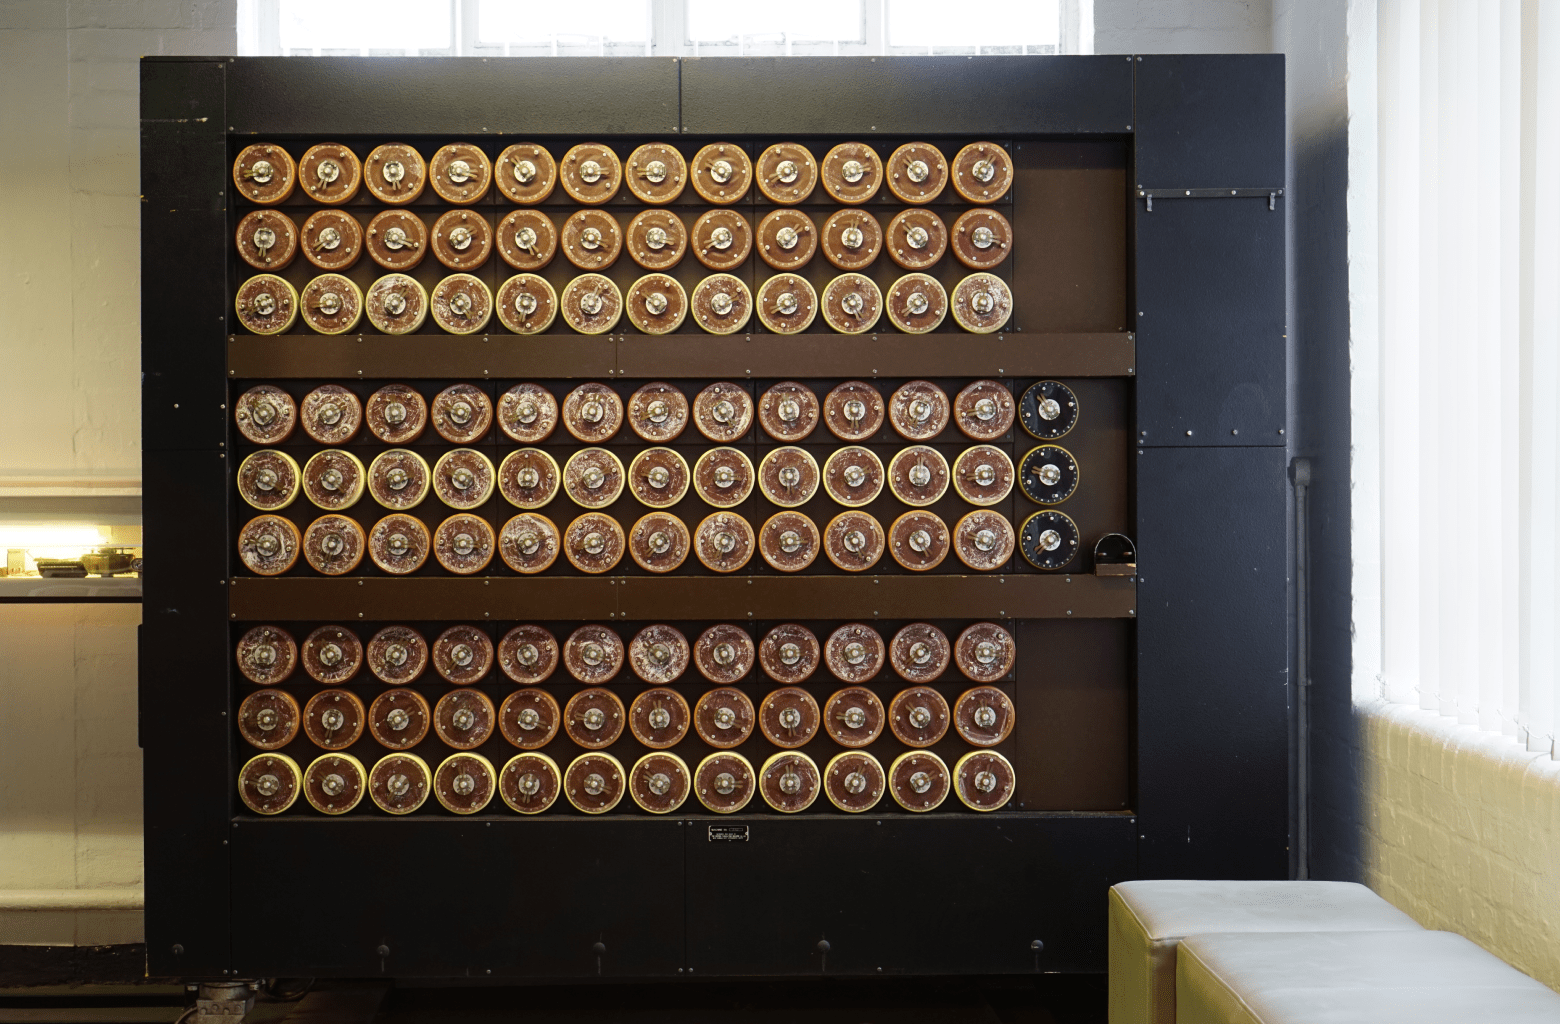 A Turing Bombe, Bletchley Park